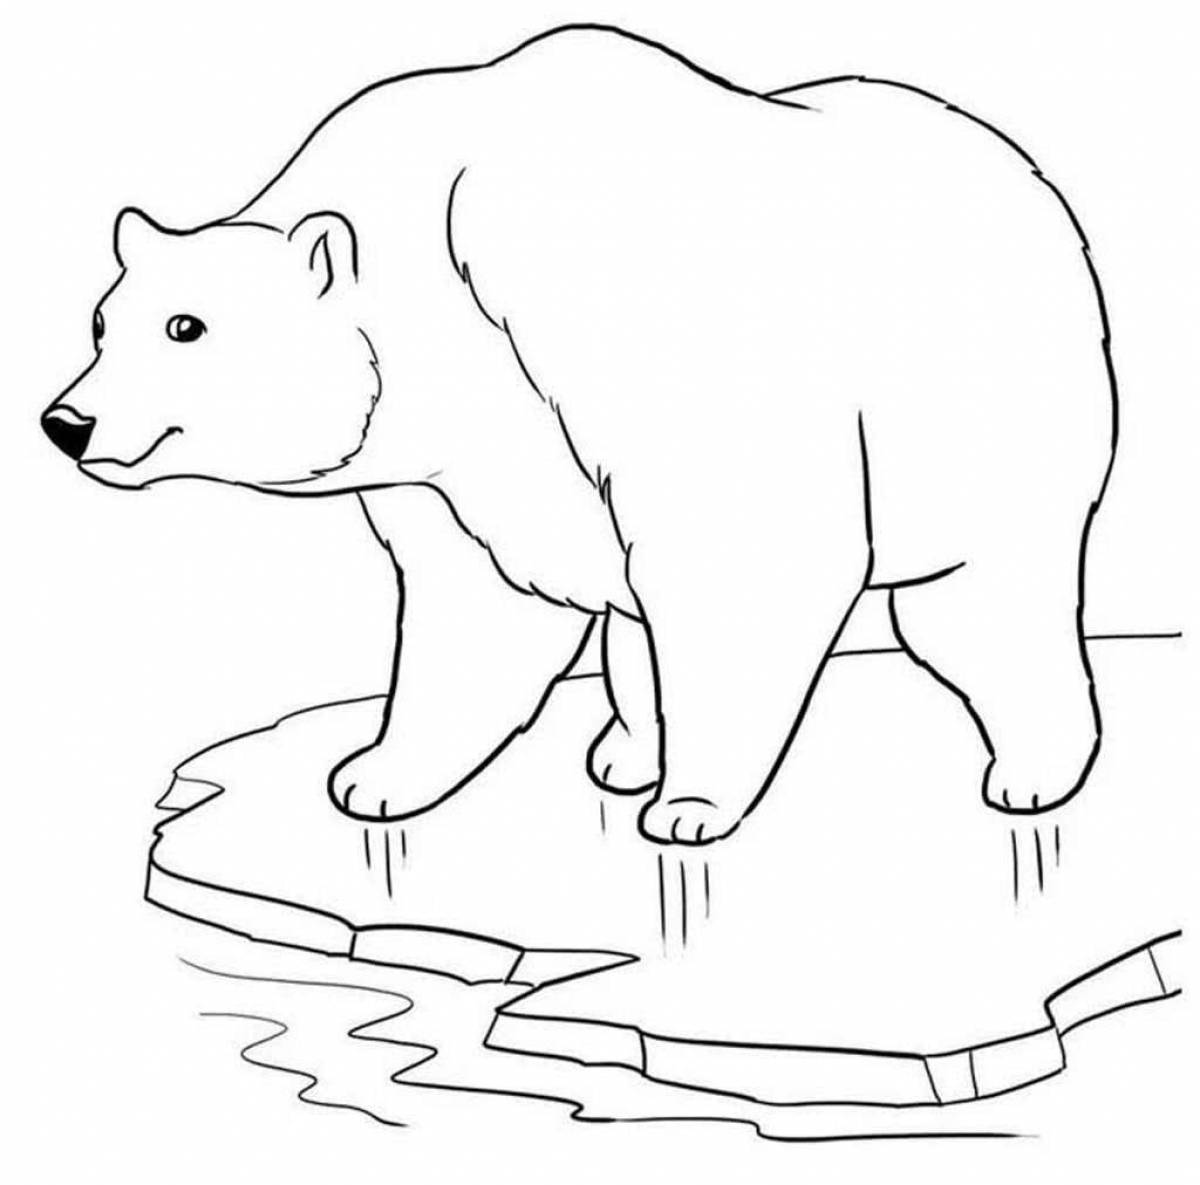 Coloring book magical polar bear for children 5-6 years old